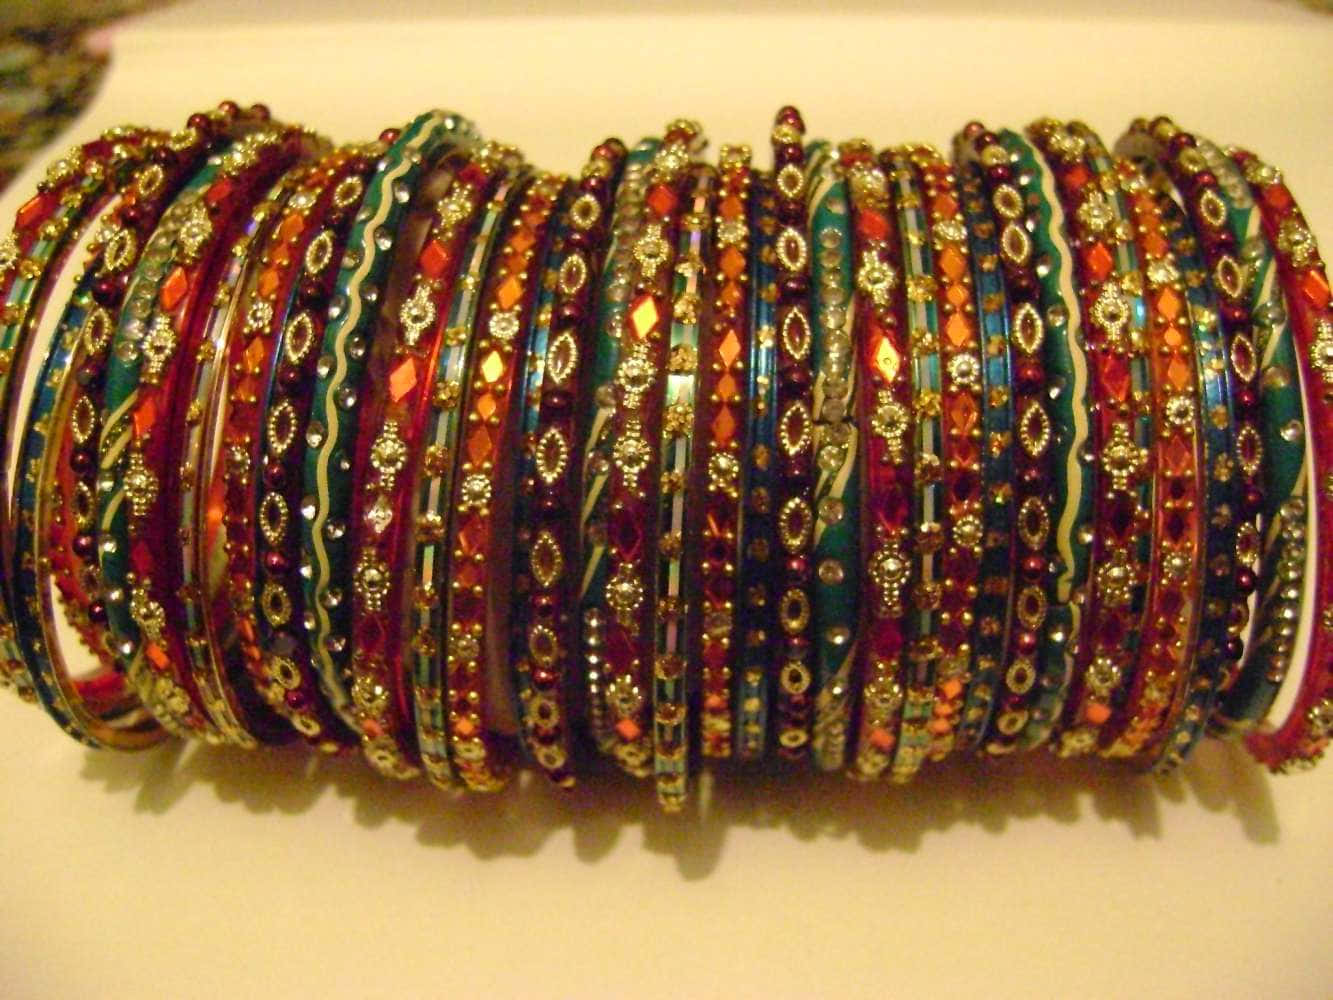 A Stack Of Colorful Bangles On A Table